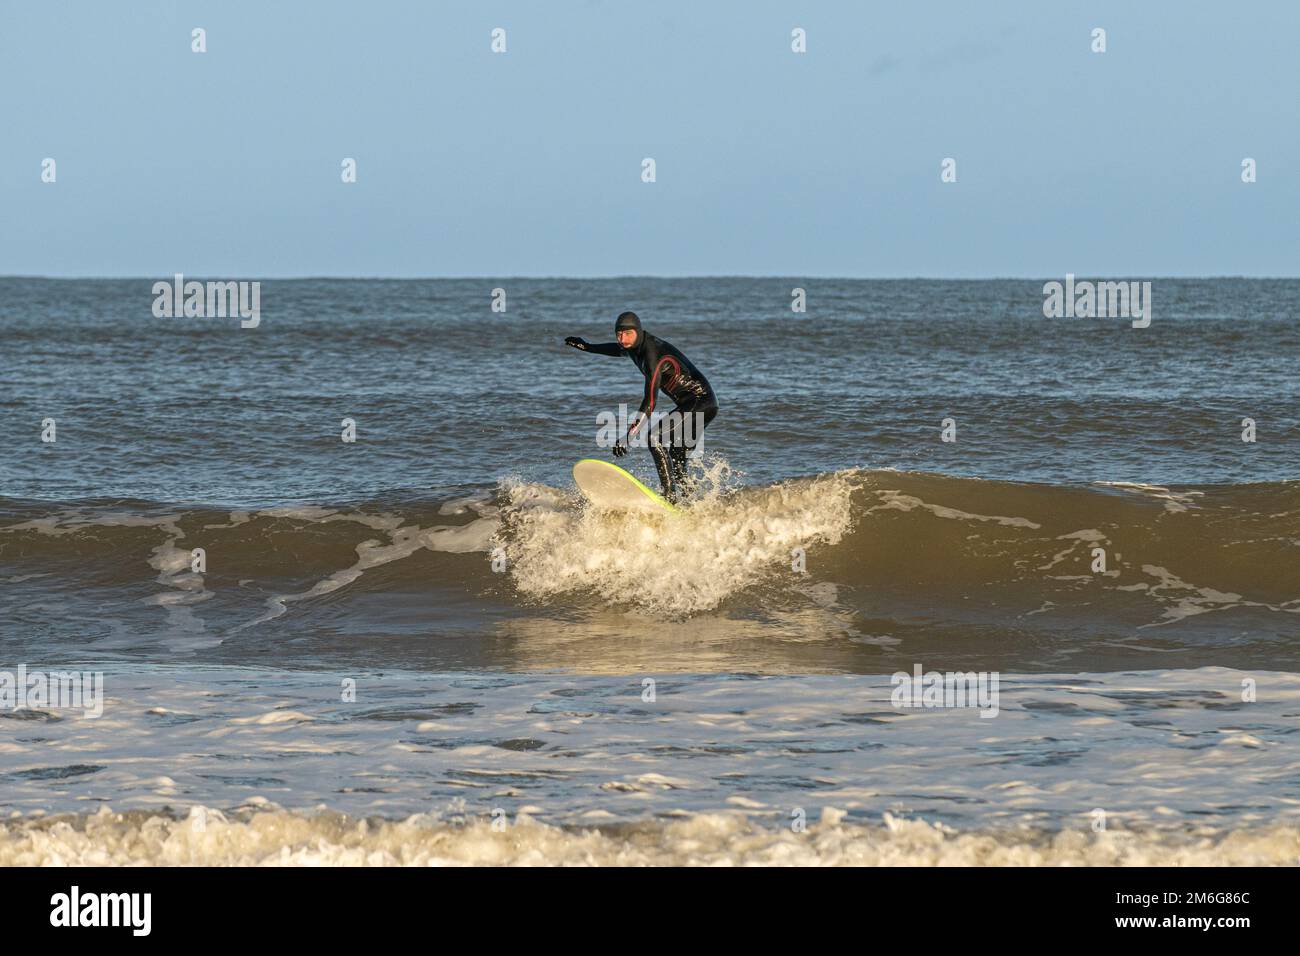 Caucasian male surfer wear a black wetsuit coming onto shore. Cayton Bay, North Yorkshire, UK Stock Photo